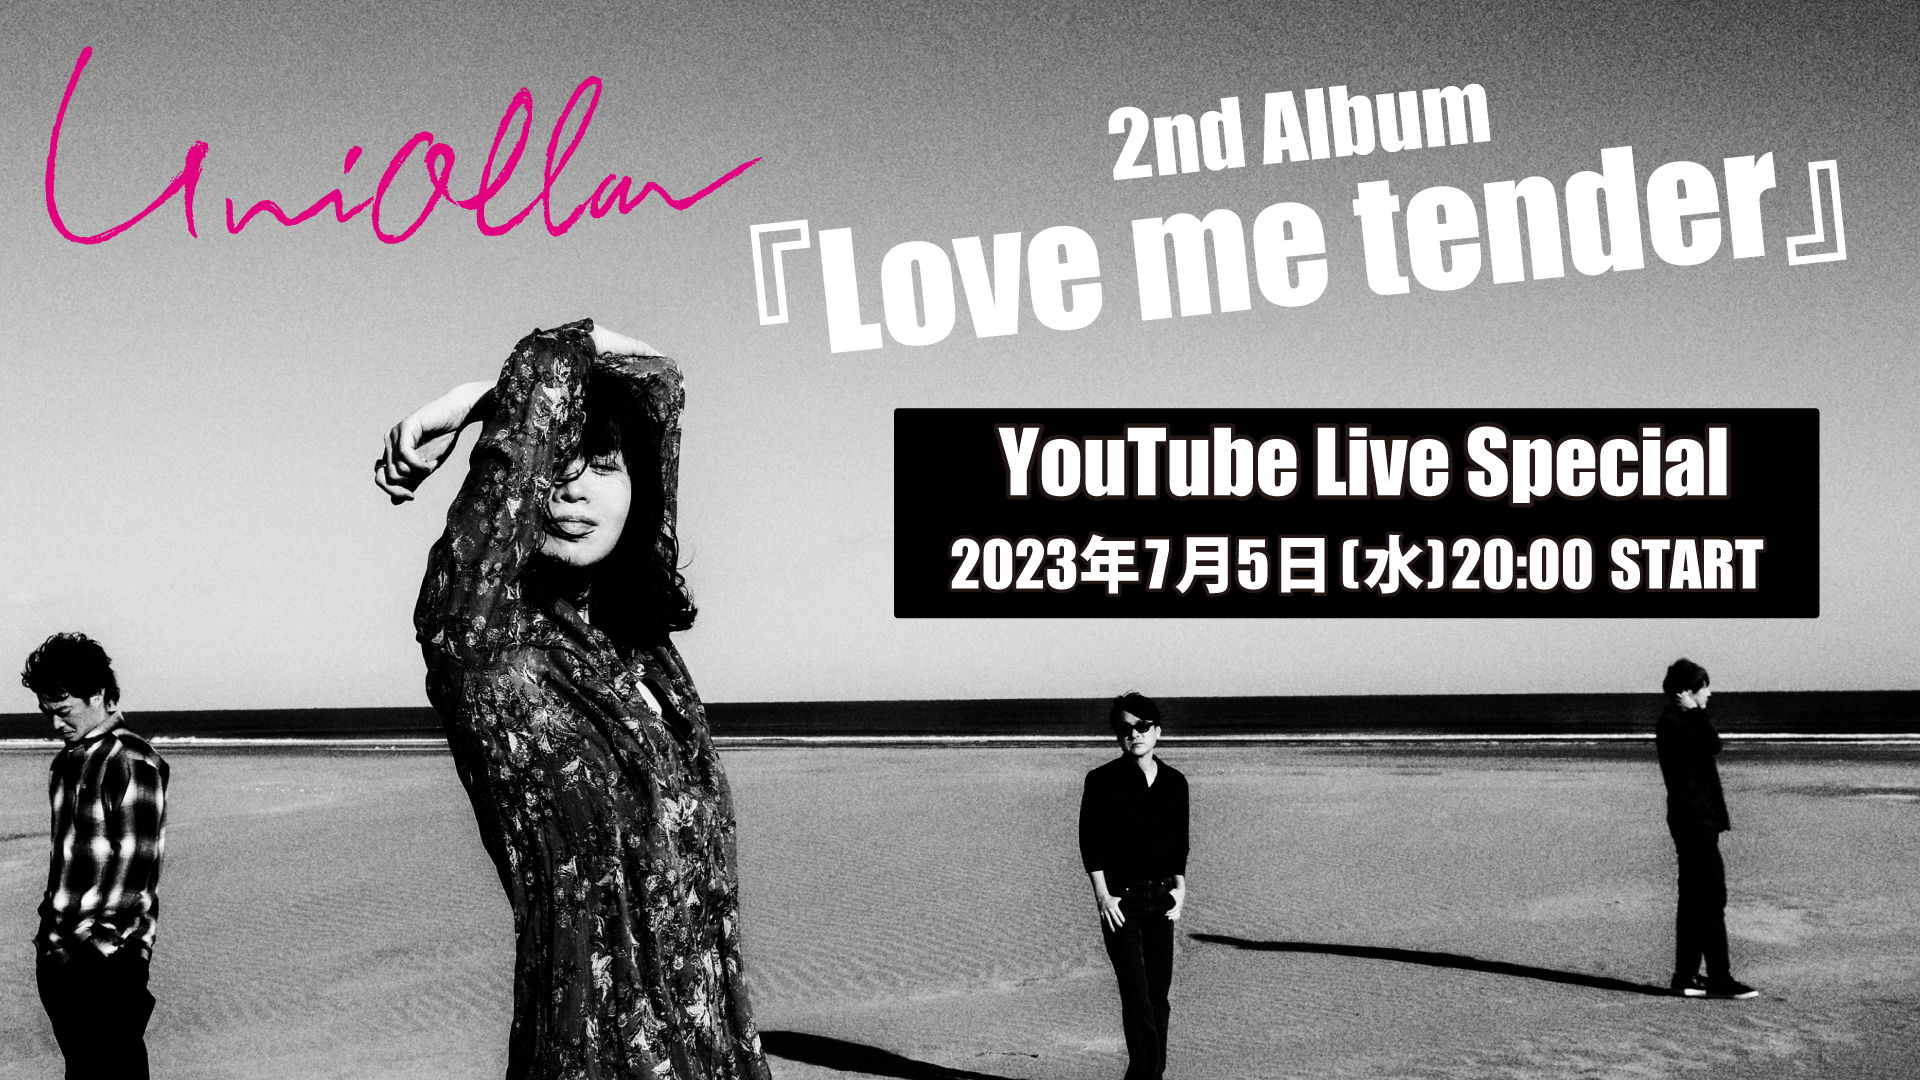 Uniolla】7/5(水)20:00～ 2nd Album『Love me tender』発売記念 YouTube Live決定！ | LOVE  PSYCHEDELICO OFFICIAL SITE